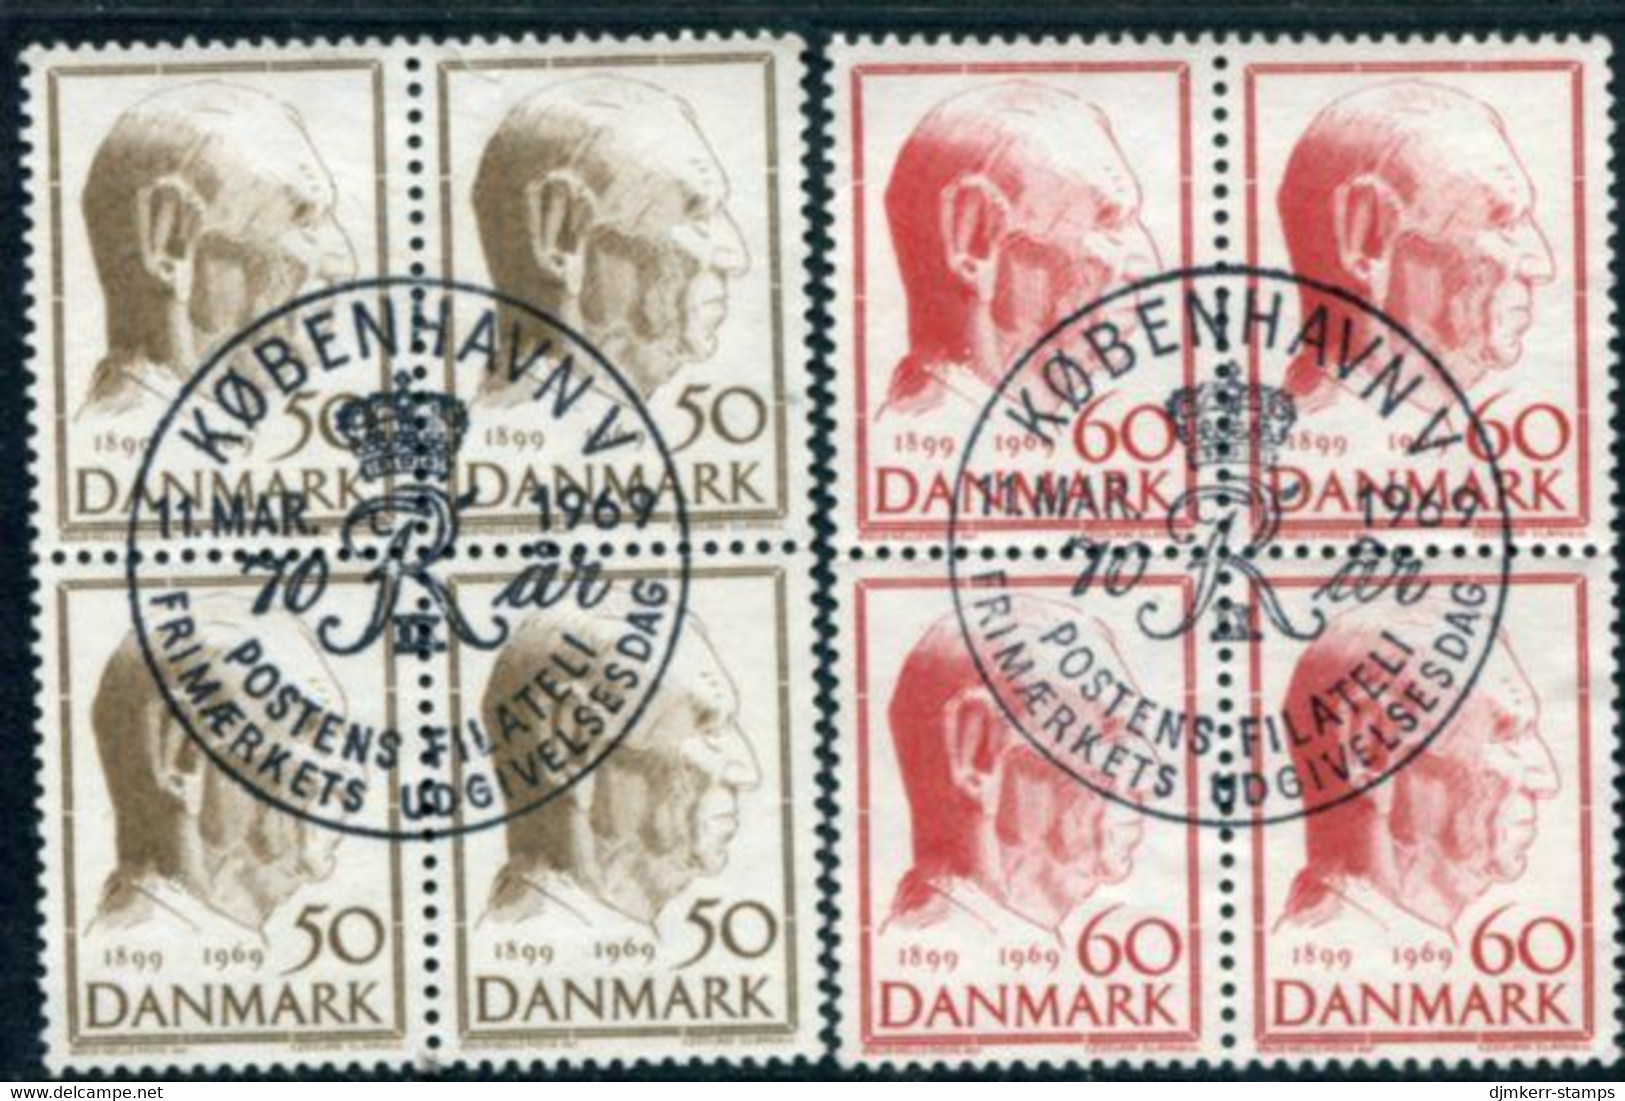 DENMARK 1969 King's 79th Birthday Blocks Of 4 Used   Michel 477-78 - Used Stamps